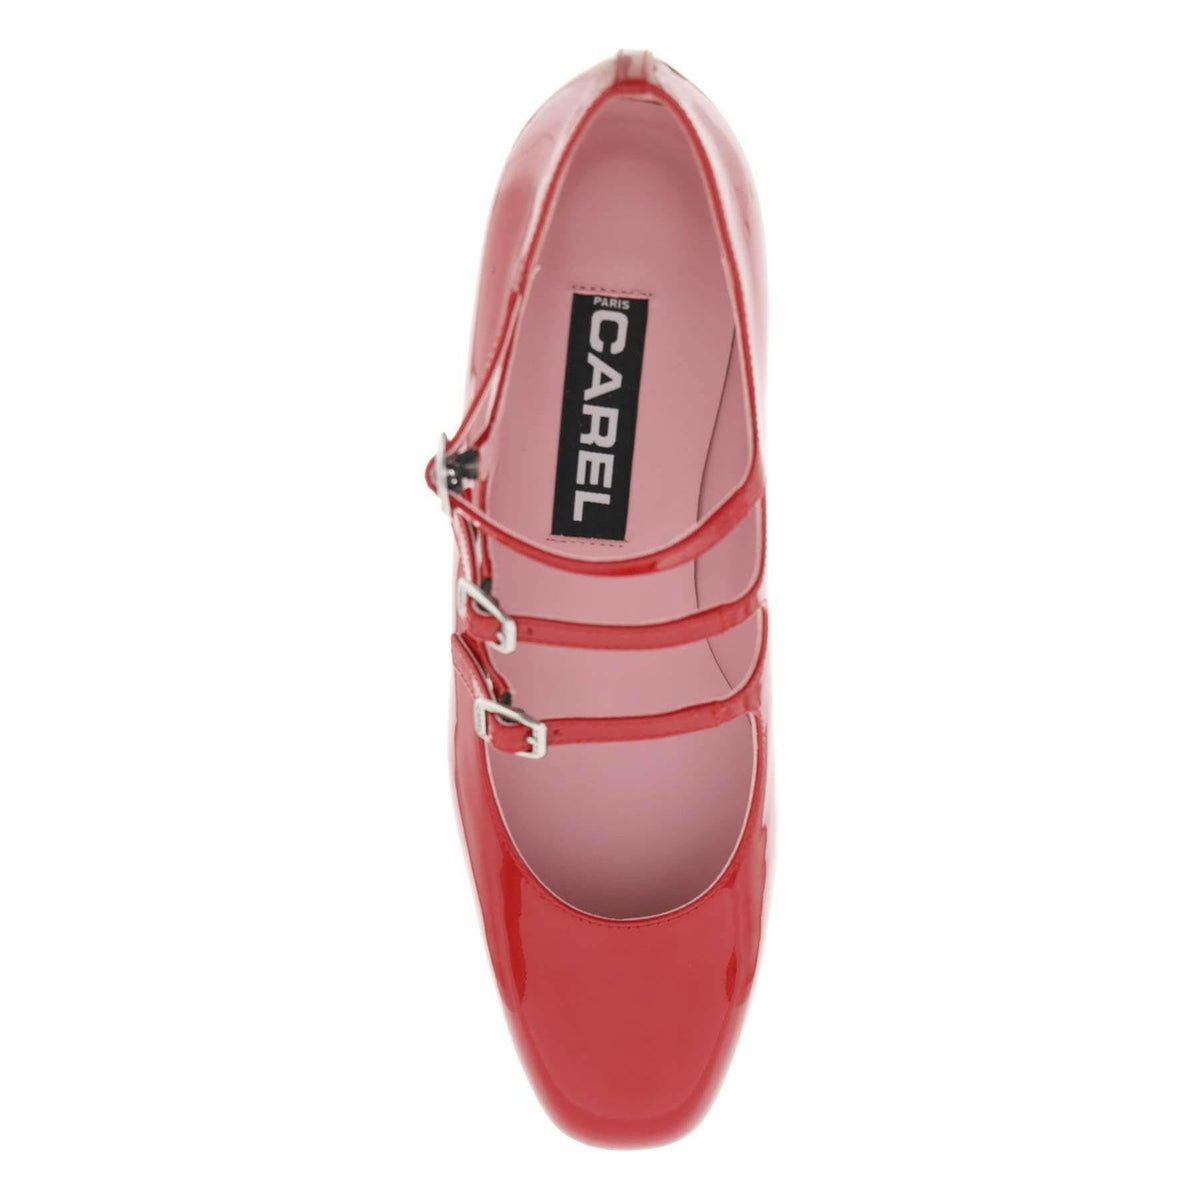 CAREL - Red Ariana Patent Leather Mary Jane Pumps - JOHN JULIA